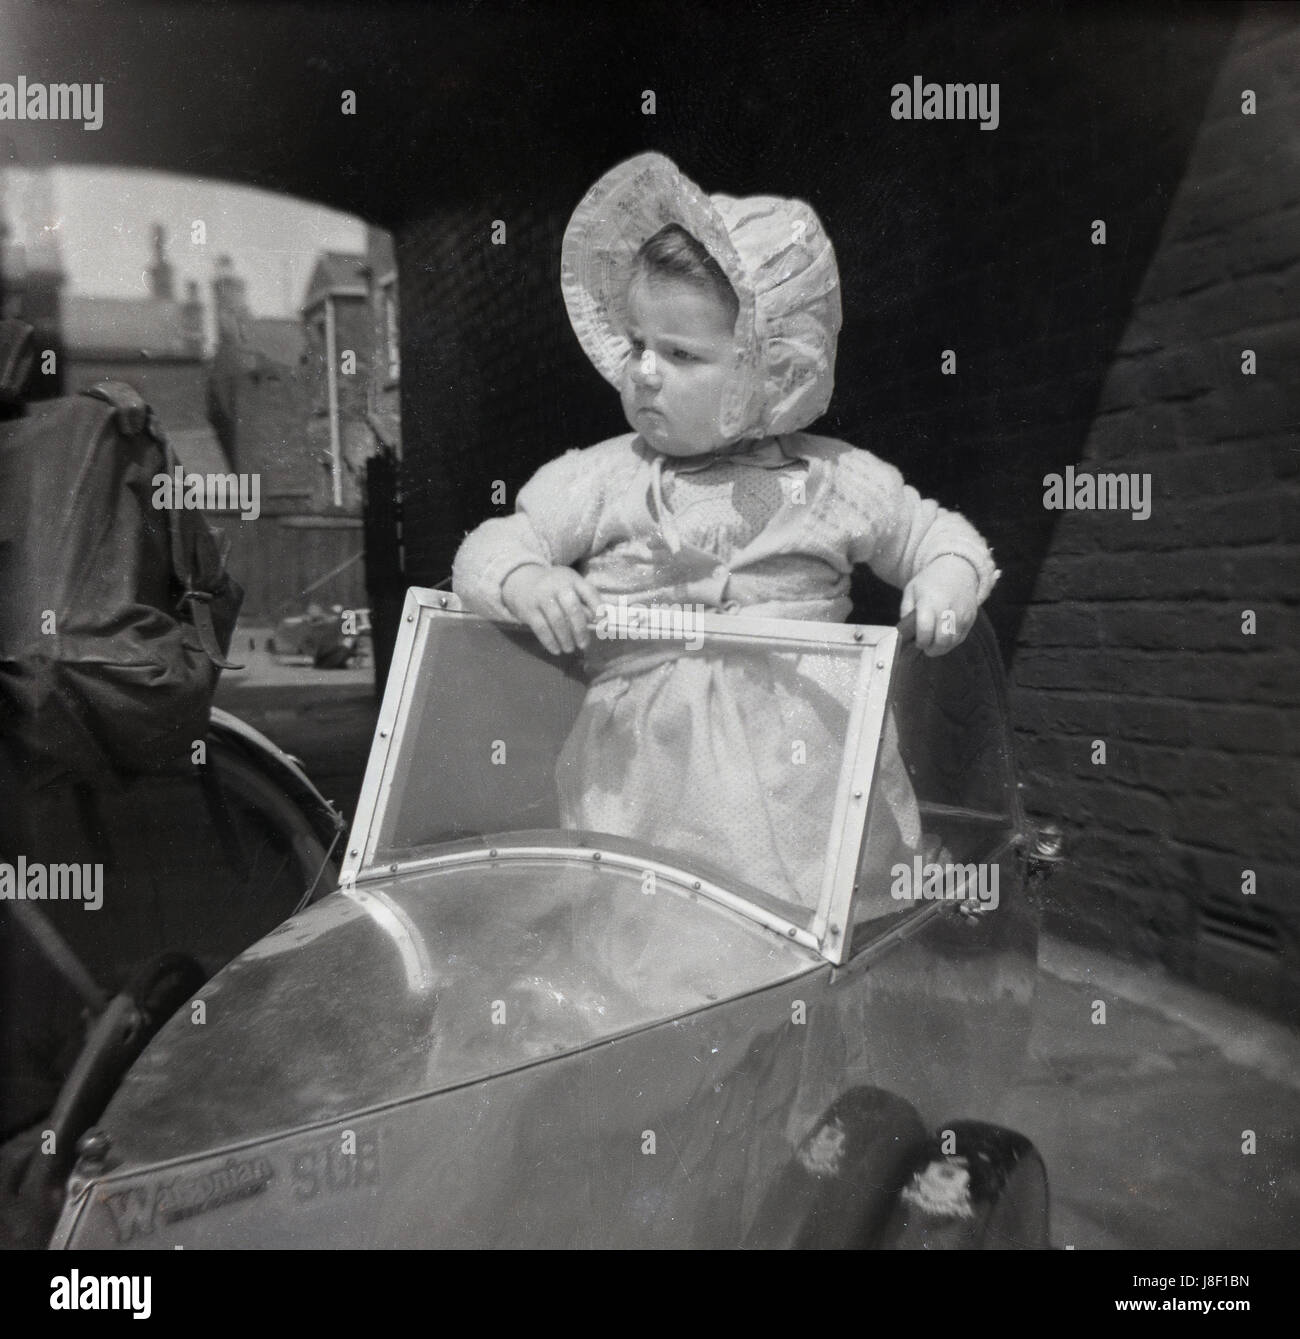 1950s, a pensive looking female toddler in her Sunday best bonnet standing on the seat of a British made 'Watsonian Sub', a child or juvenile sidecar that fitted onto the side of a pedal bicycle. Taking young children in small trailers such as these, was popular in this ear before the motorcar became affordable for the masses. Watsonia sidecars were made in Albion Rd, Greet, Birmingham, England, UK. Although made primarily for bicycle use, they were also fitted to small motorccycles, such as mopeds. Stock Photo